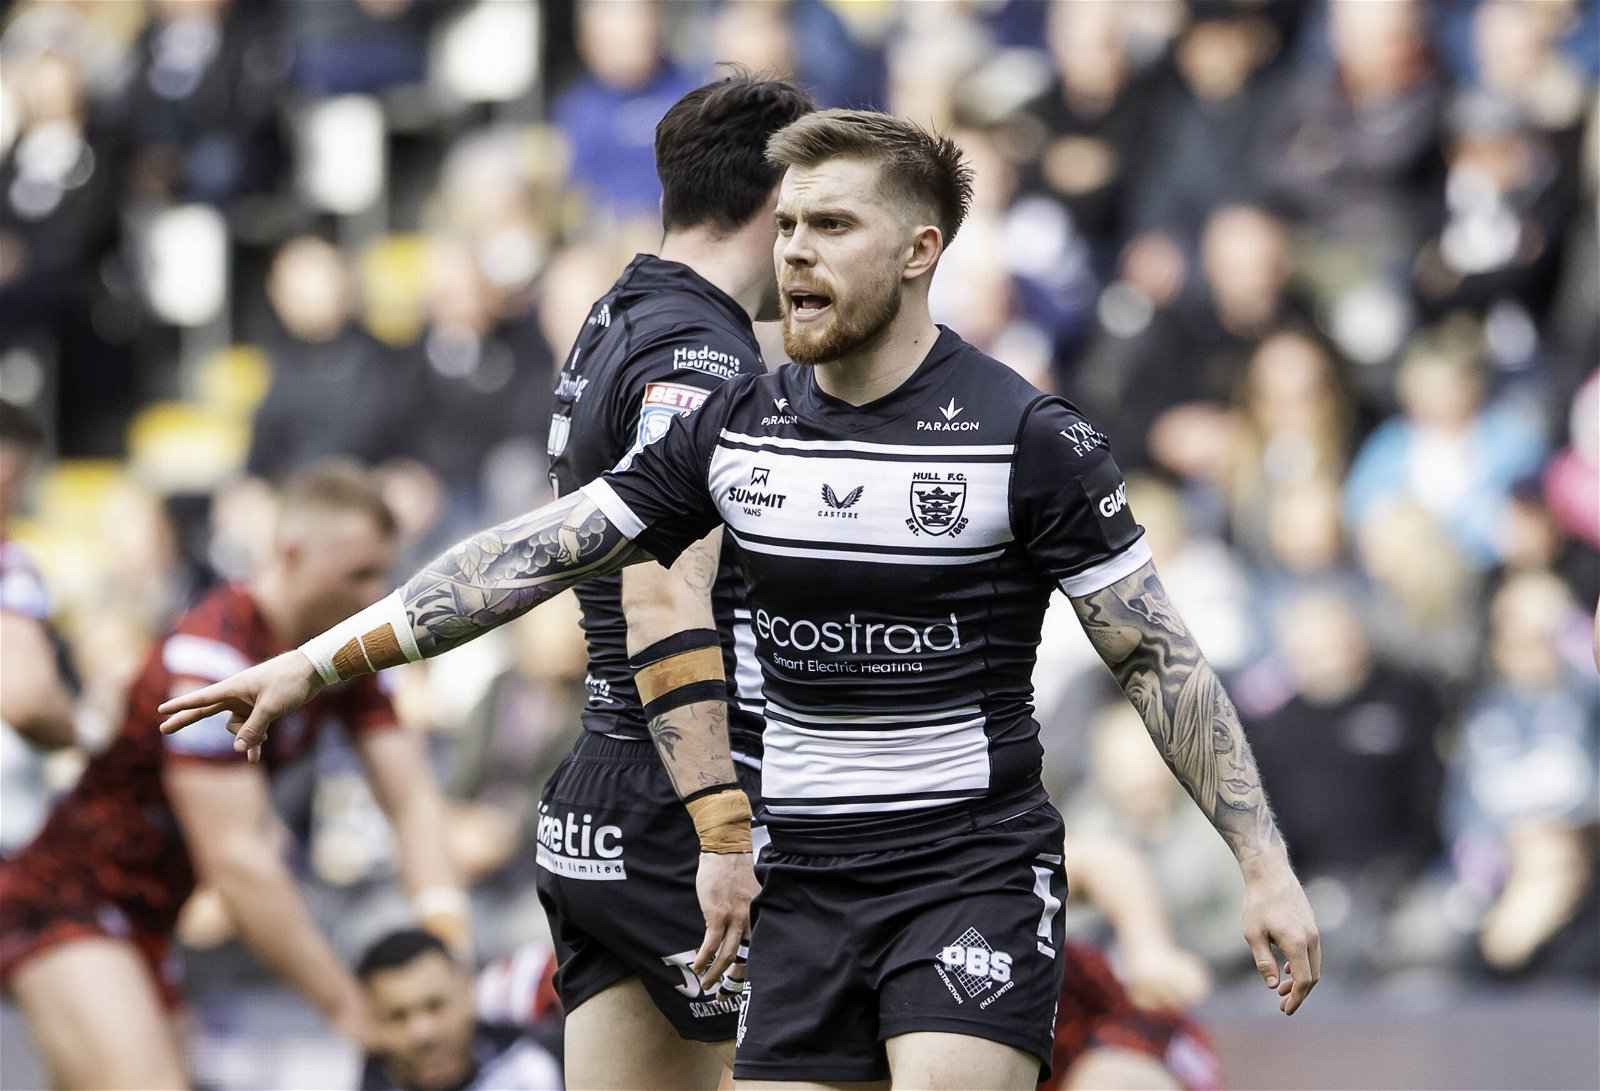 Morgan Smith, wearing Hull FC's new shirt. It's predominantly black, with a white stripe across where the badge is, and one right near the bottom as well. Where there should usually be a middle stripe, the Ecostrad logo is. White sleeve cuffs finish it off, as well as the Summit Vans and Castore logos in black on the top white stripe, and above that, the Paragon logo in white.